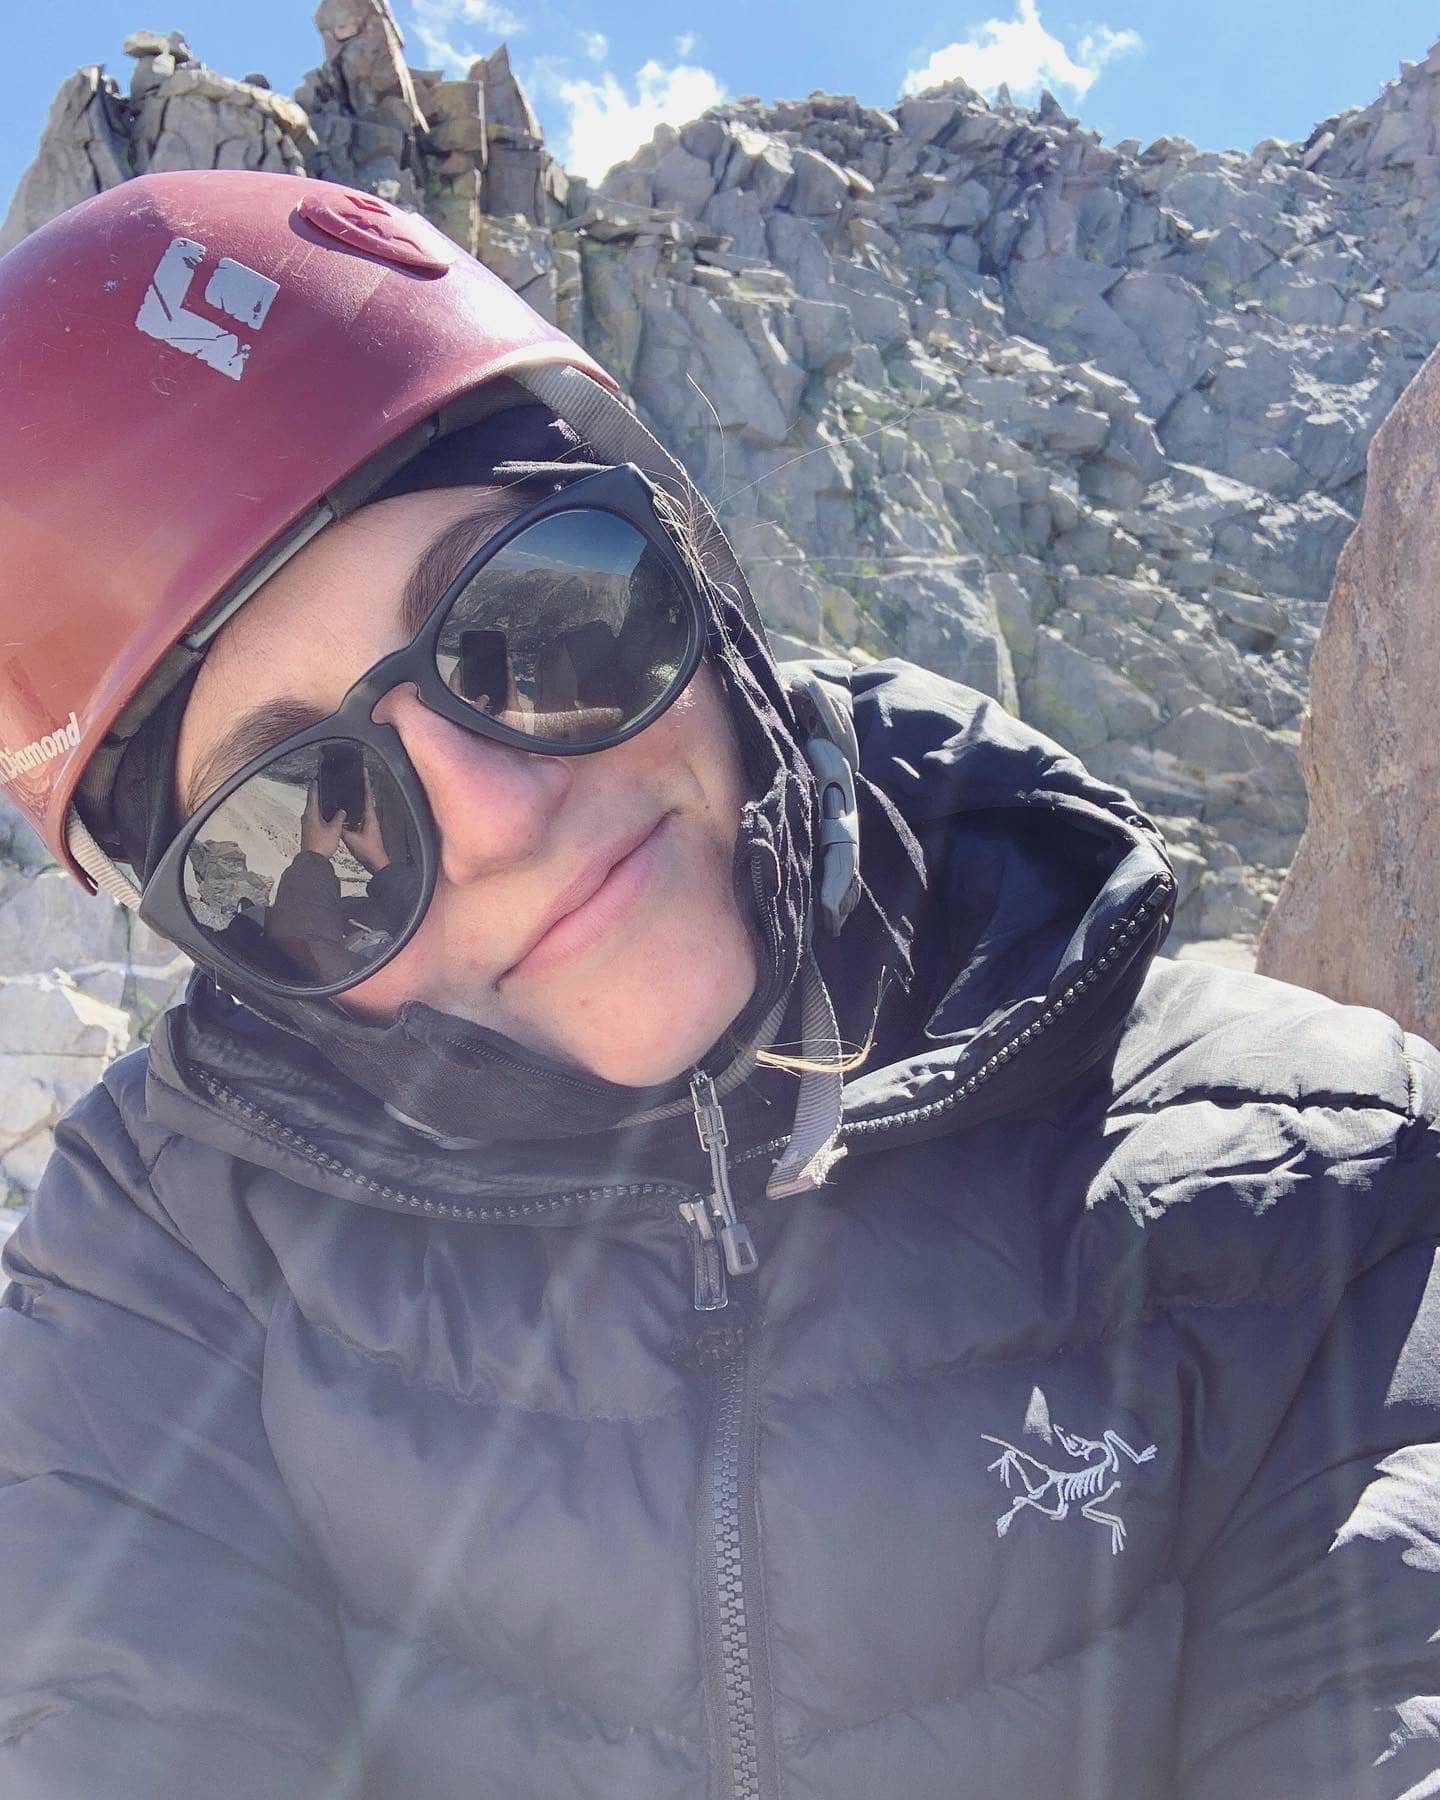 A selfie of Jessica wearing a rock climbing helmet, sunglasses and a black puffy jacket taken while climbing an alpine rock route